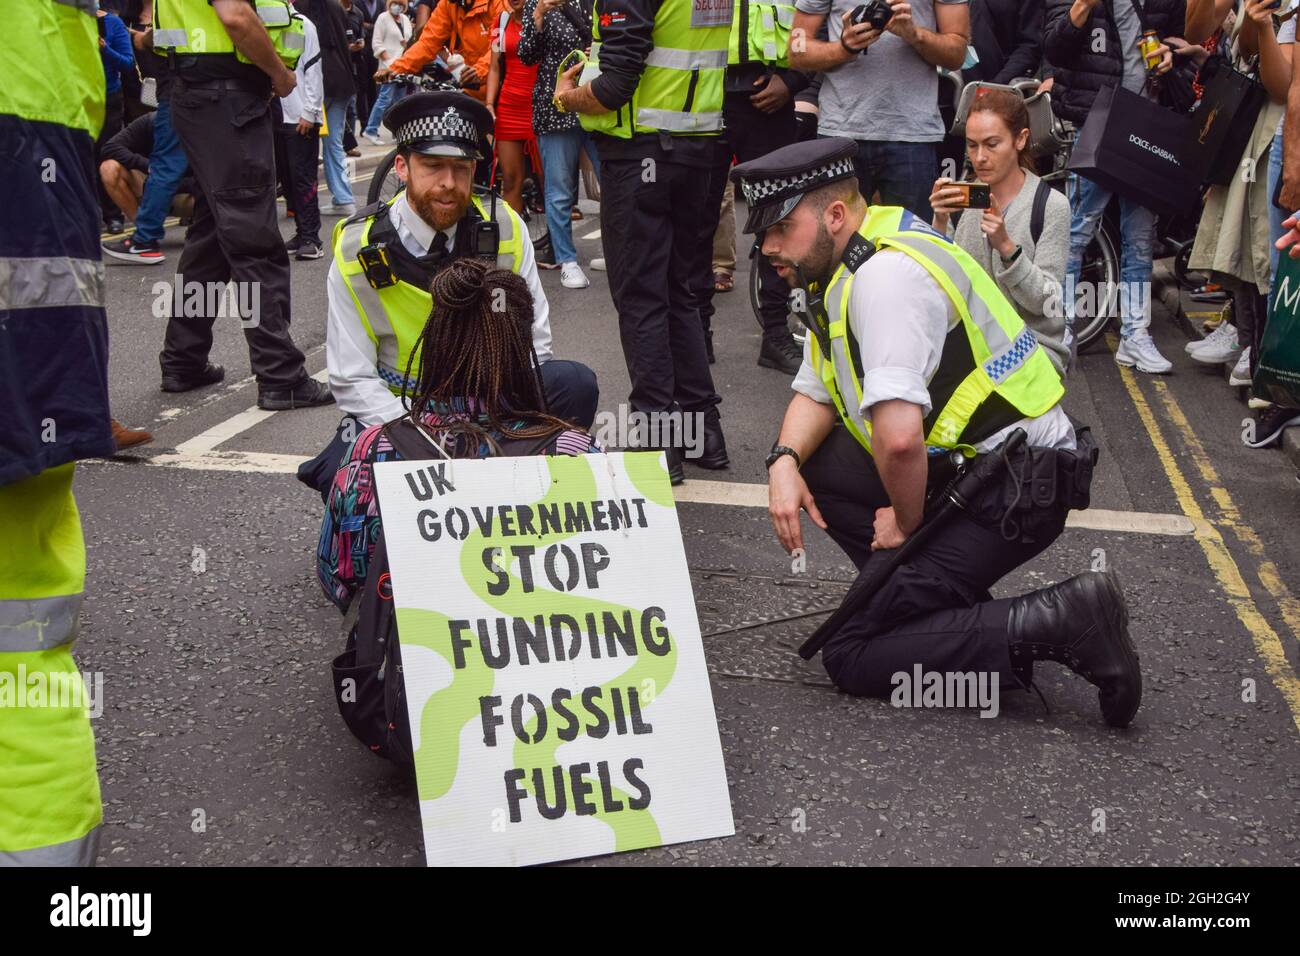 London, United Kingdom. 4th September 2021. Police talk to a protester blocking the road. A pair of Extinction Rebellion protesters blocked the traffic on Oxford Street on the final day of their two-week Impossible Rebellion campaign, calling on the UK Government to act meaningfully on the climate and ecological crisis. (Credit: Vuk Valcic / Alamy Live News) Stock Photo